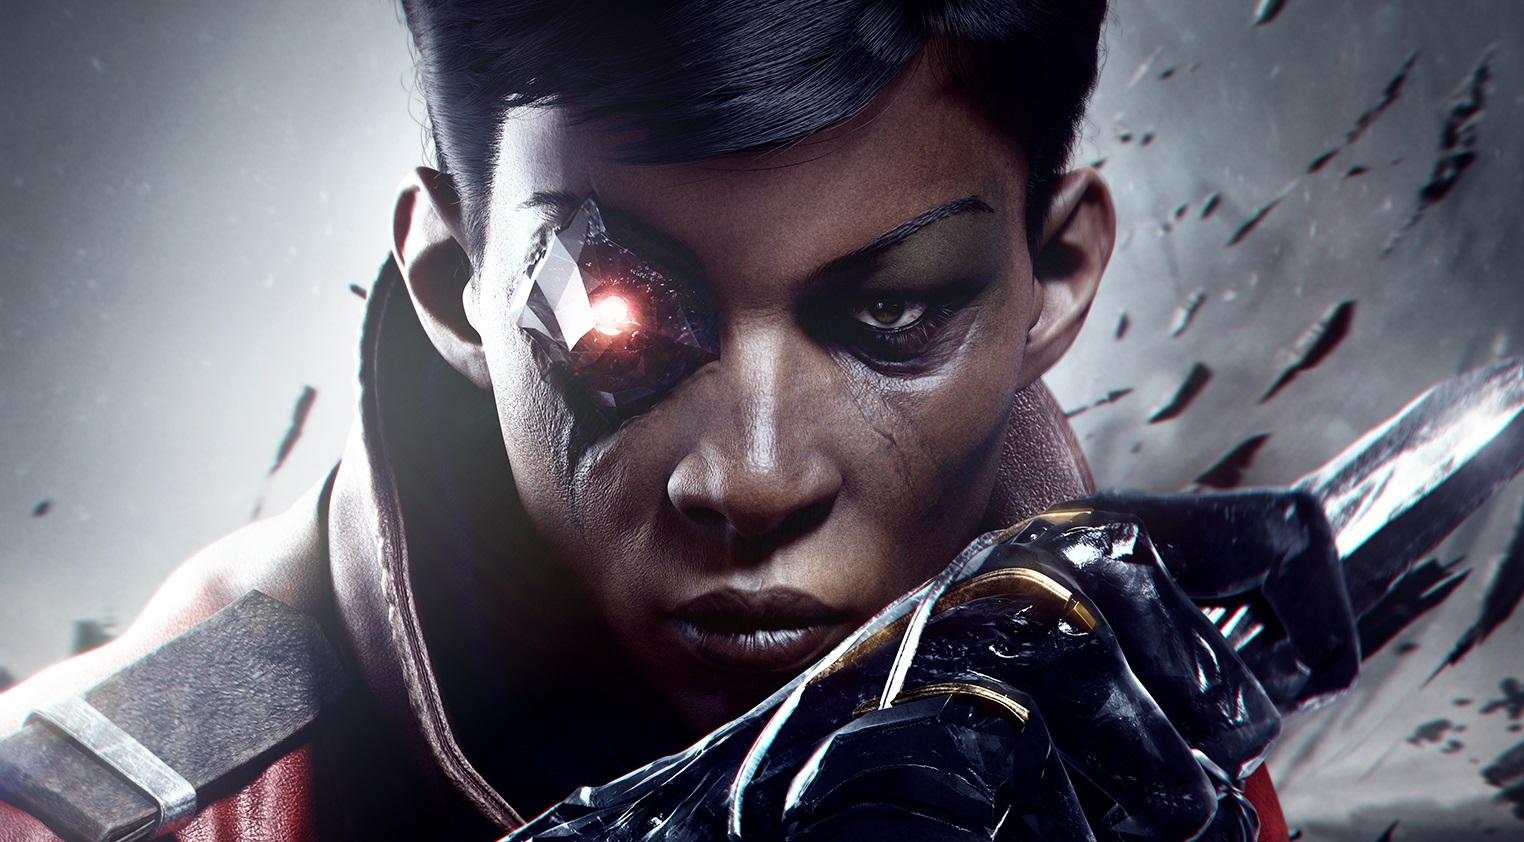 Dishonored: Death of the Outsider Announced for PC, PS4, and Xbox One